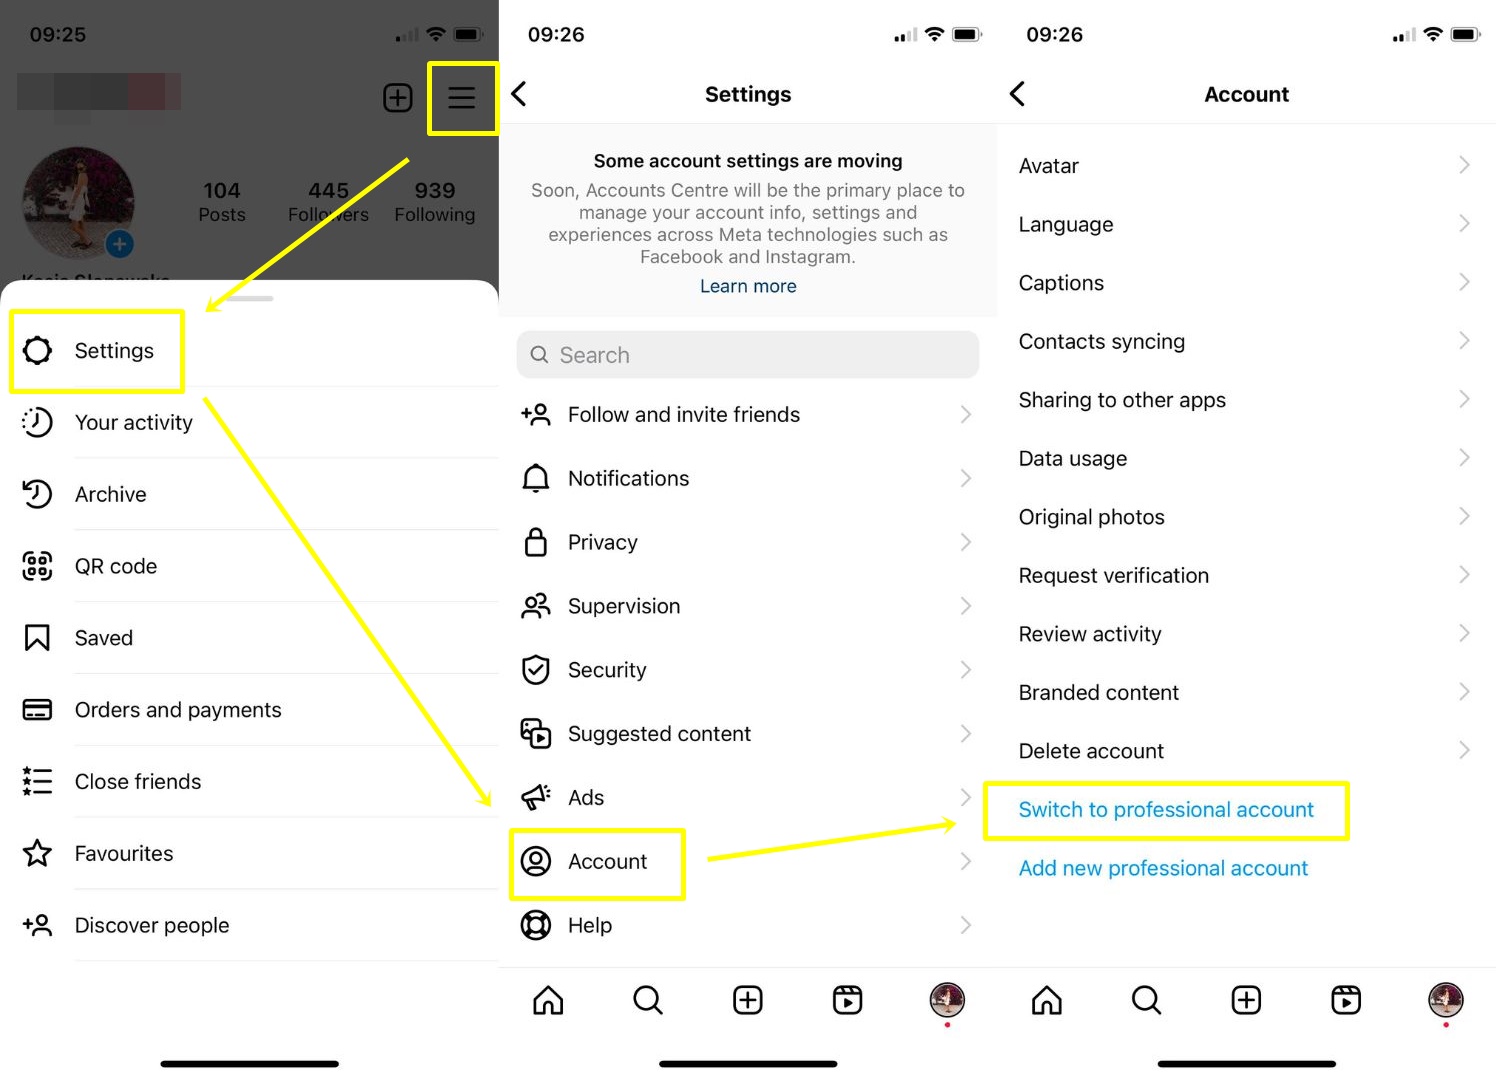 Here's how to switch your account to business: go to your profile page on Instagram, enter "Settings," then "Account" and scroll to the bottom. Then, click "Switch to professional account."